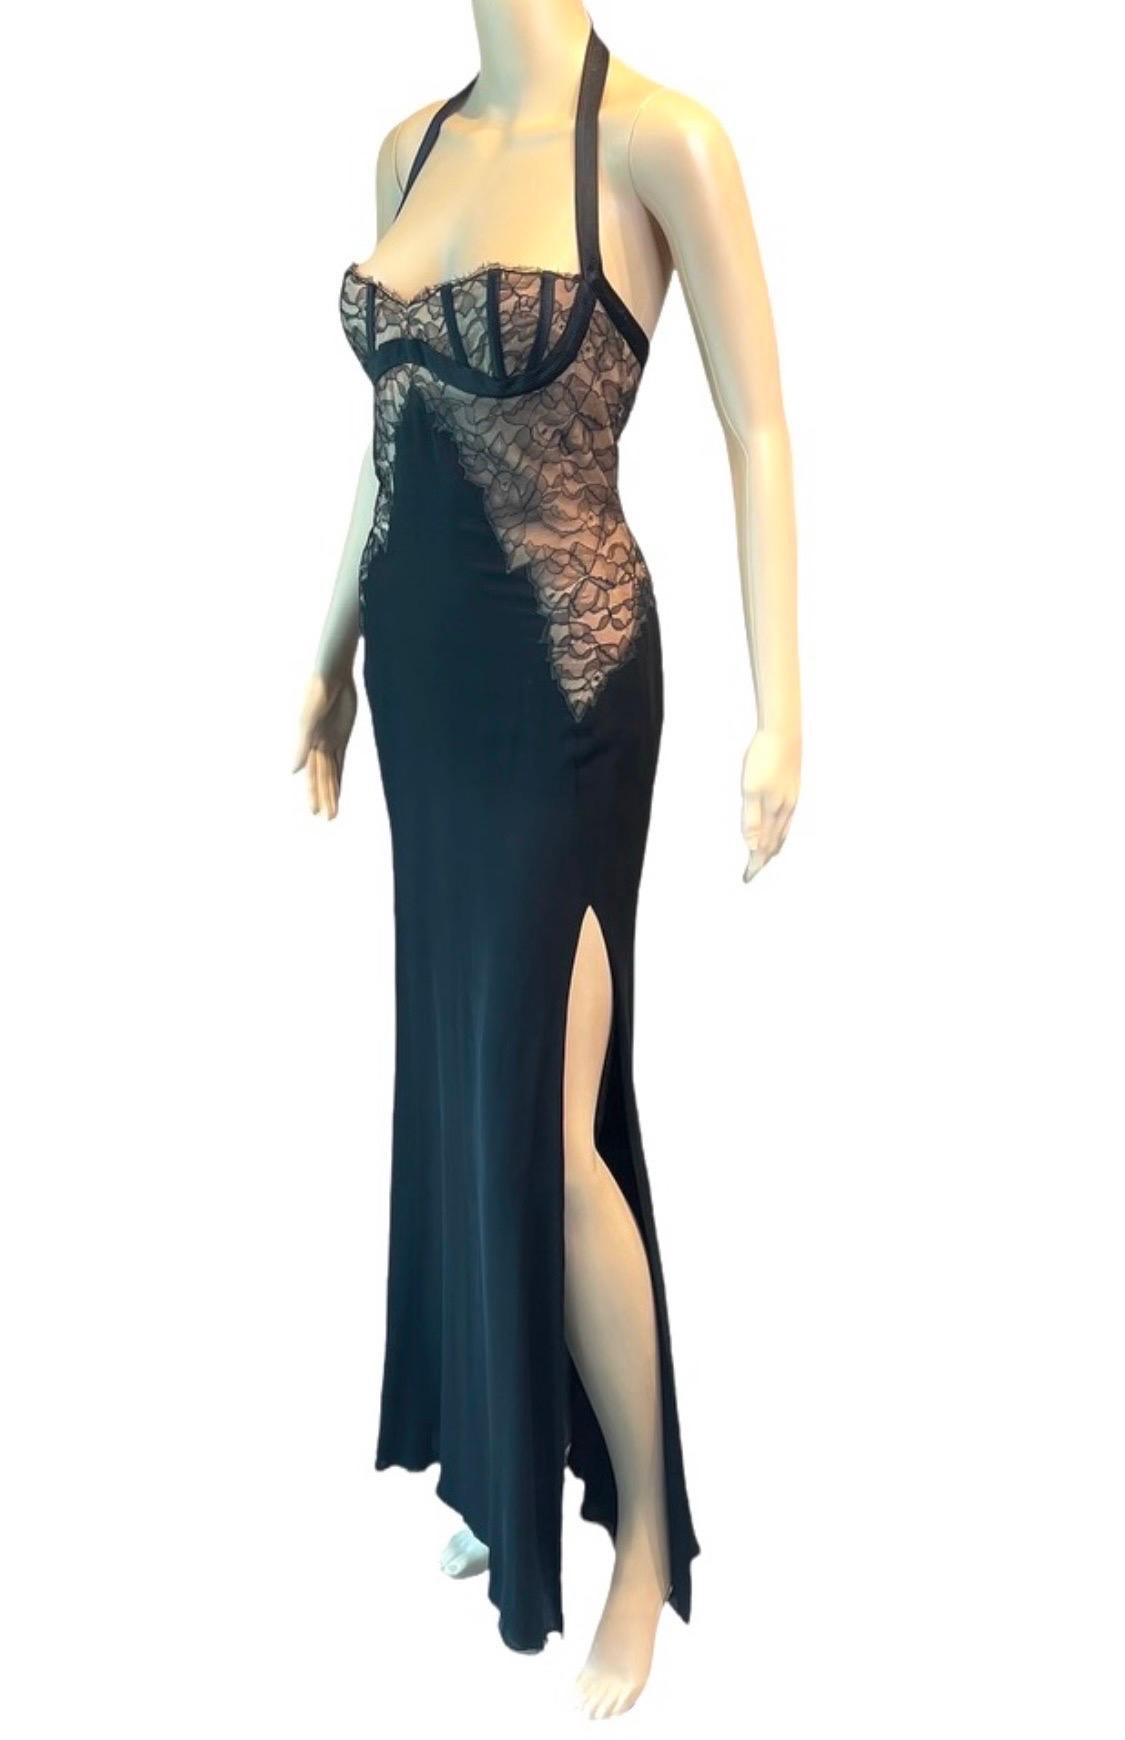 Gianni Versace S/S 1992 Bustier Lace Bra Sheer Panels Slit Evening Dress Gown For Sale 2